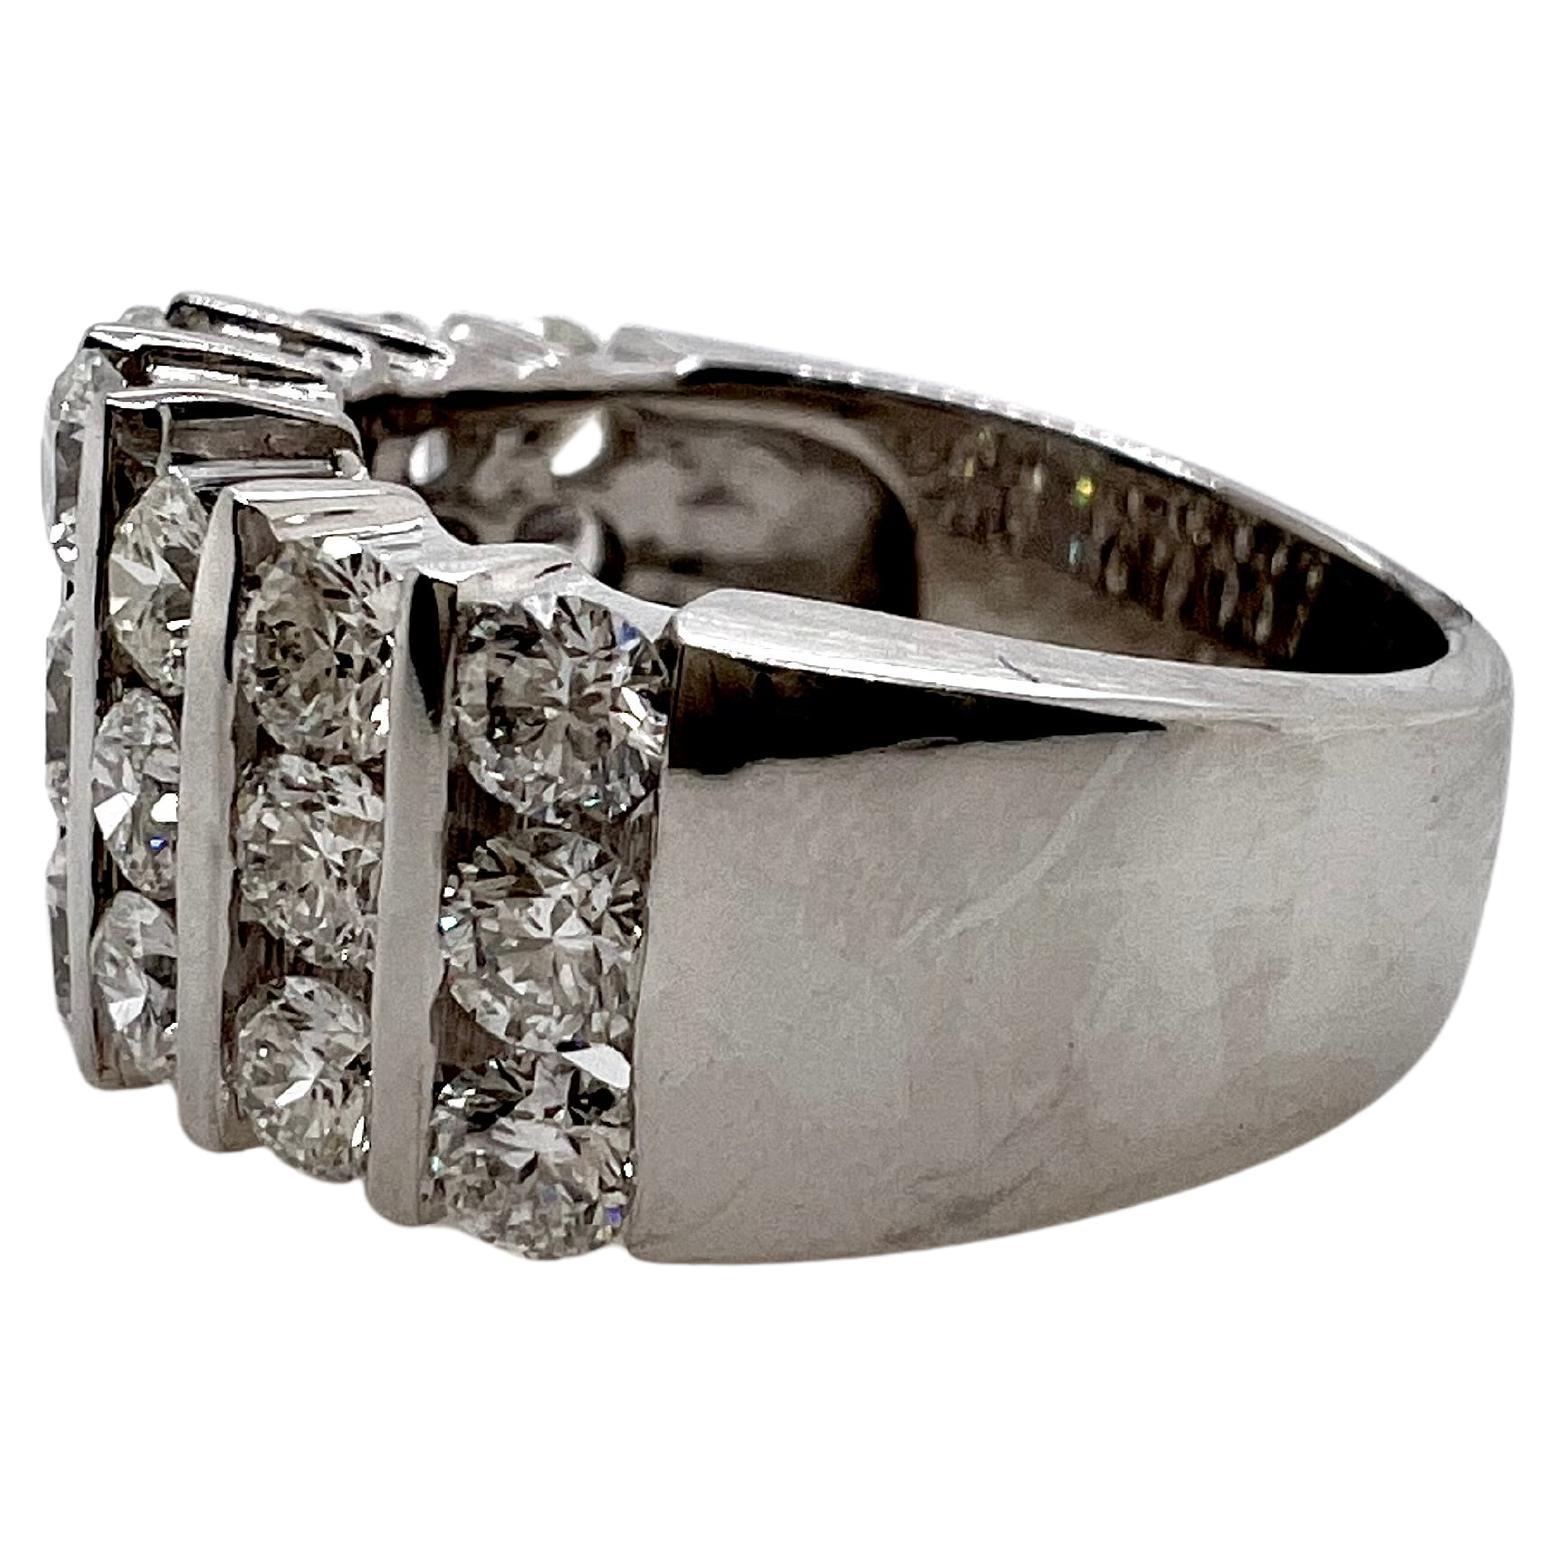 This classic diamond ring has large diamonds channel set vertically to accentuate the finger.  The 18k white gold setting houses the round brilliant diamonds are absolutely glimmers and sparkles.  The heavy weight in the metal allows for daily wear